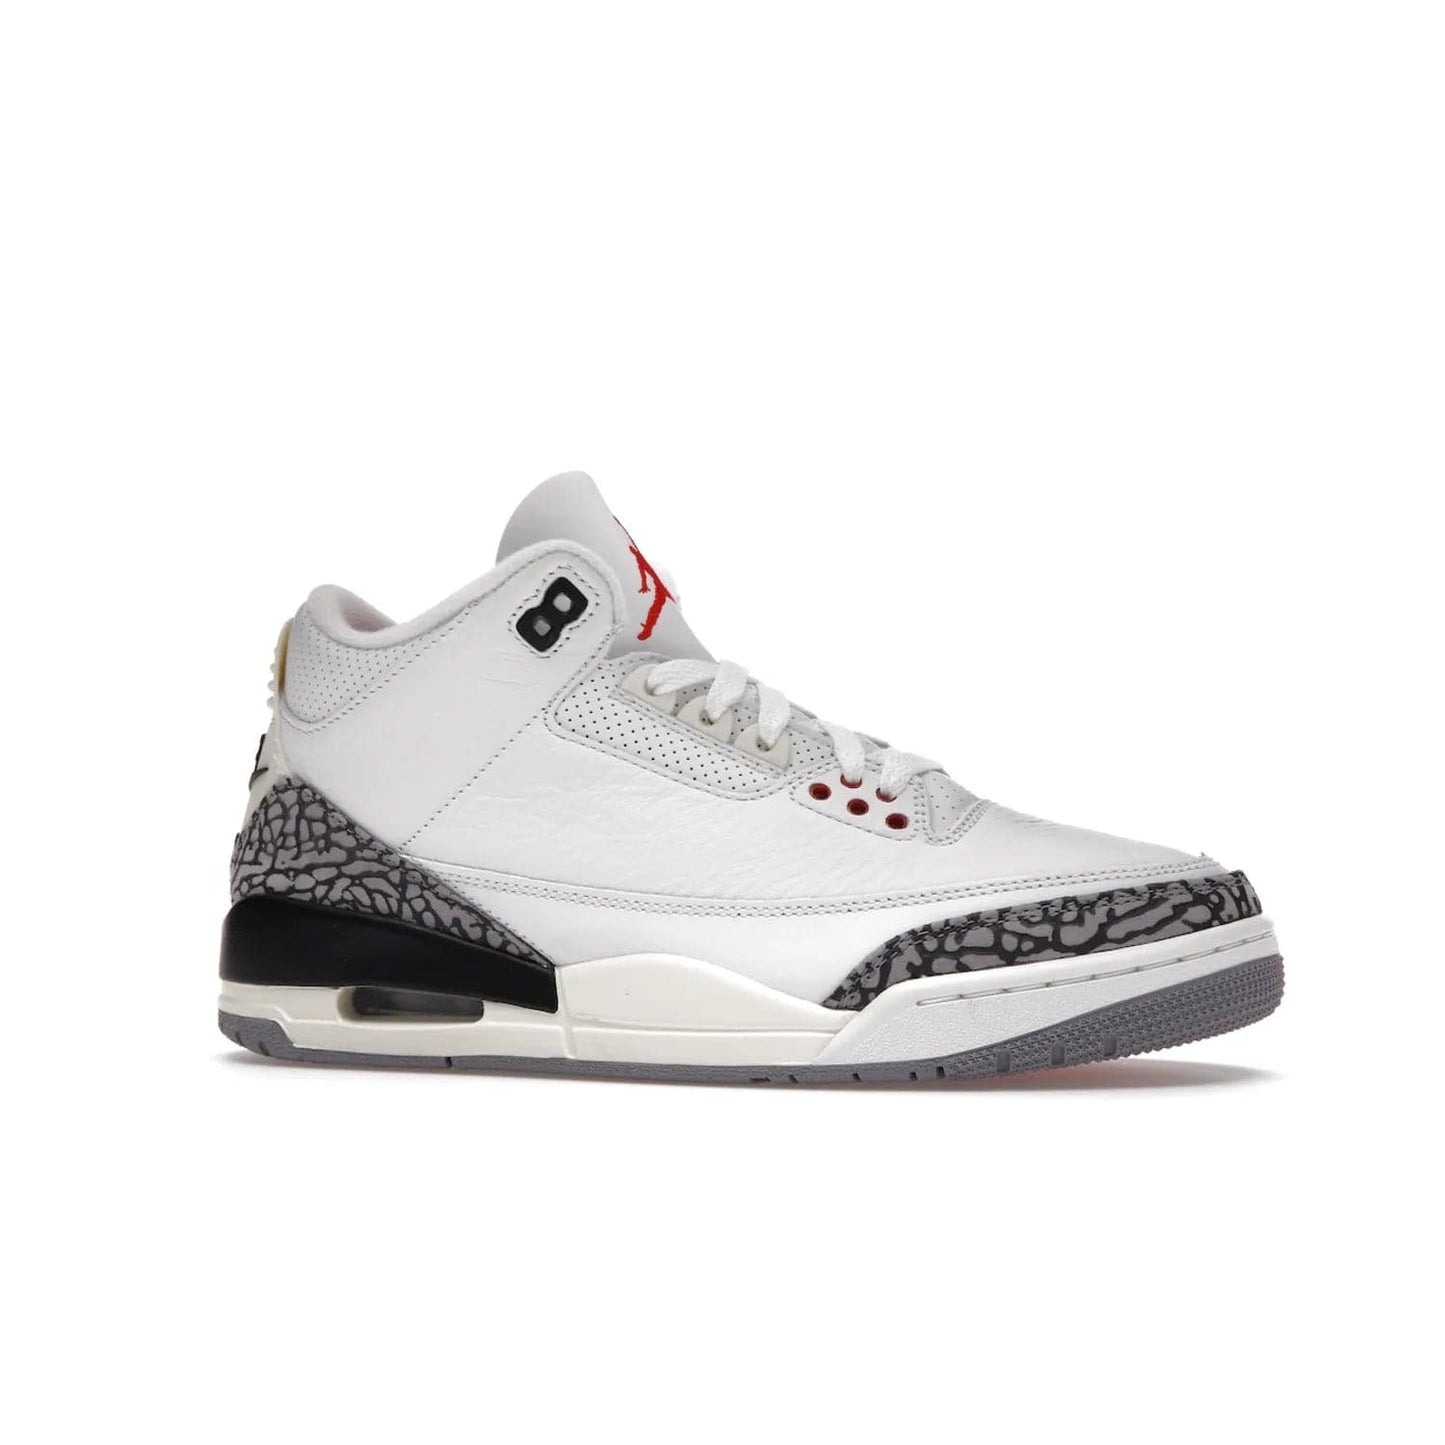 Jordan 3 Retro White Cement Reimagined - Image 3 - Only at www.BallersClubKickz.com - The Reimagined Air Jordan 3 Retro in a Summit White/Fire Red/Black/Cement Grey colorway is launching on March 11, 2023. Featuring a white leather upper, off-white midsoles and heel tabs, this vintage-look sneaker is a must-have.